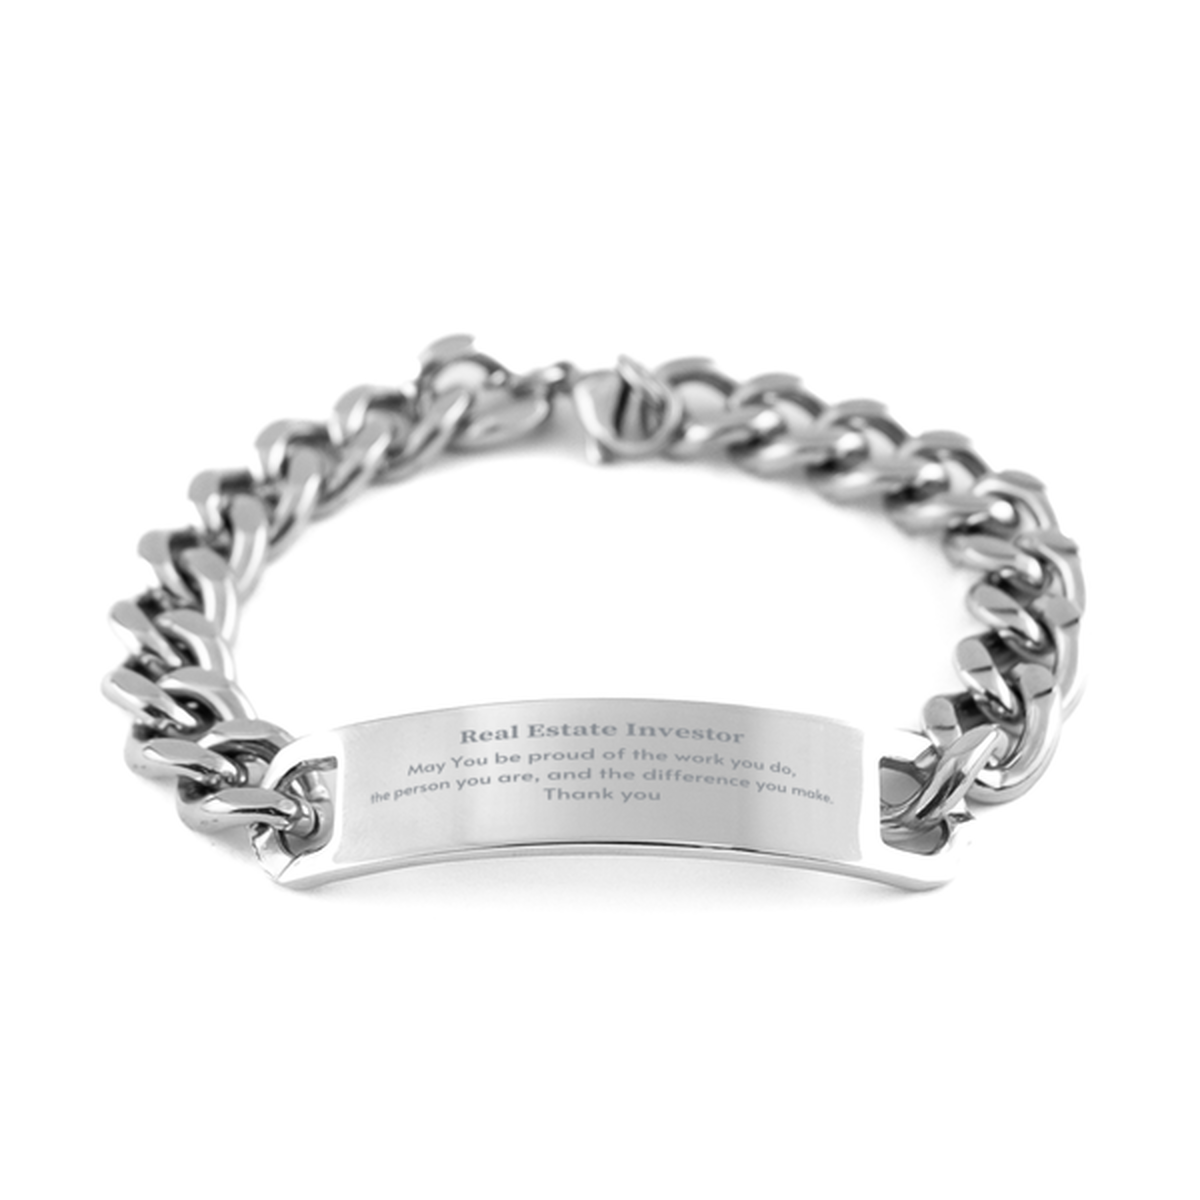 Heartwarming Cuban Chain Stainless Steel Bracelet Retirement Coworkers Gifts for Real Estate Investor, Real Estate Investor May You be proud of the work you do, the person you are Gifts for Boss Men Women Friends